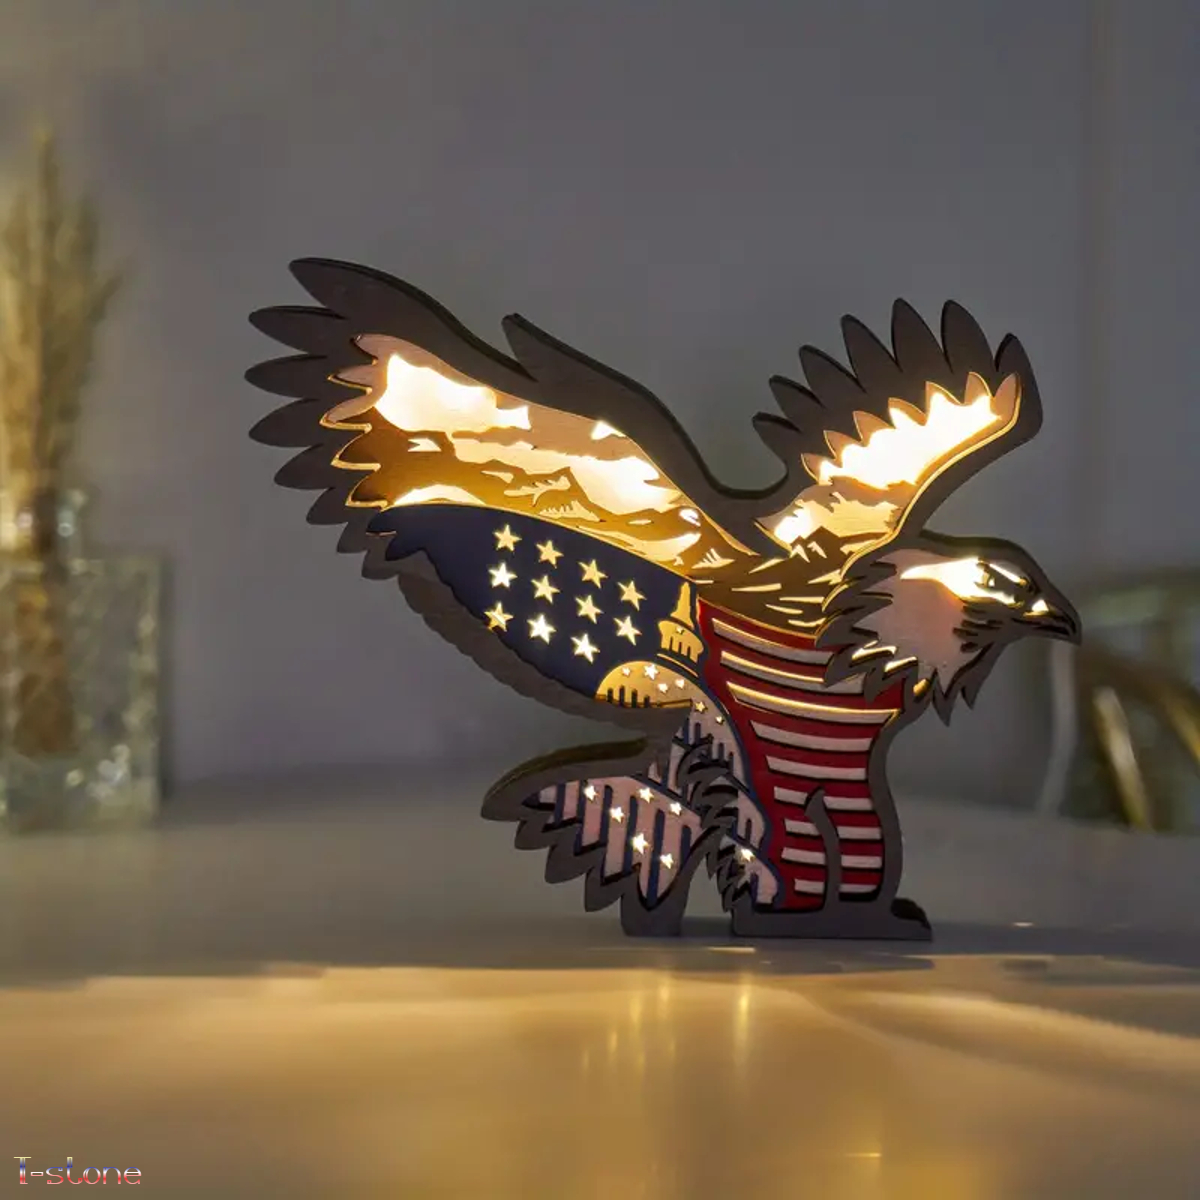 Neon sign Wooden LED sign Eagle American miscellaneous goods Handmade Stylish Interior Excellent presence Room decoration Gift Atmosphere creation, handmade works, interior, miscellaneous goods, ornament, object